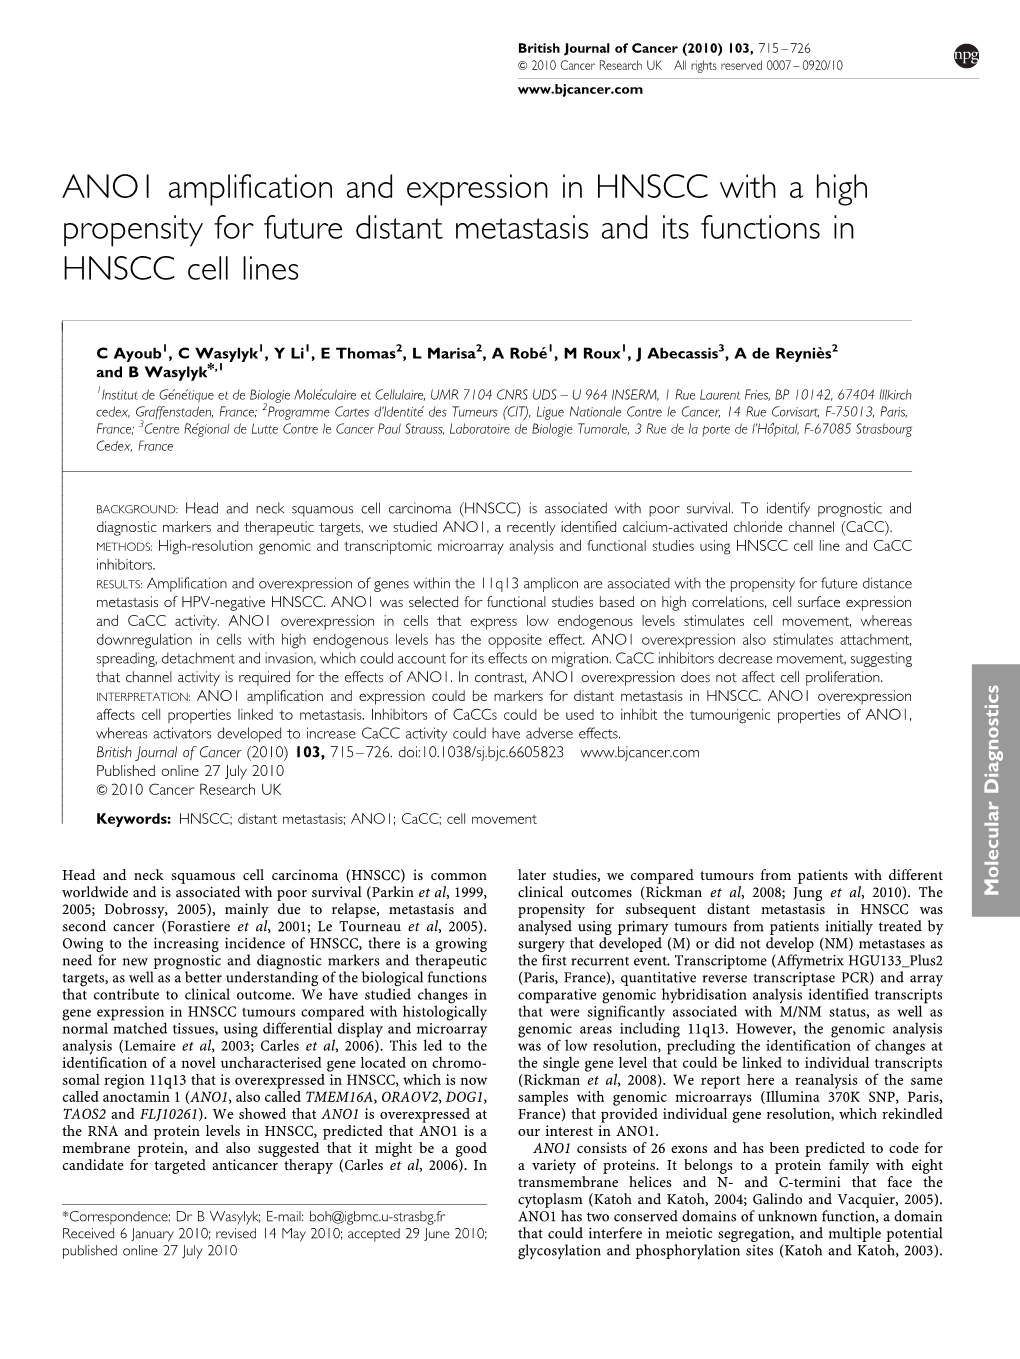 ANO1 Amplification and Expression in HNSCC with a High Propensity for Future Distant Metastasis and Its Functions in HNSCC Cell Lines